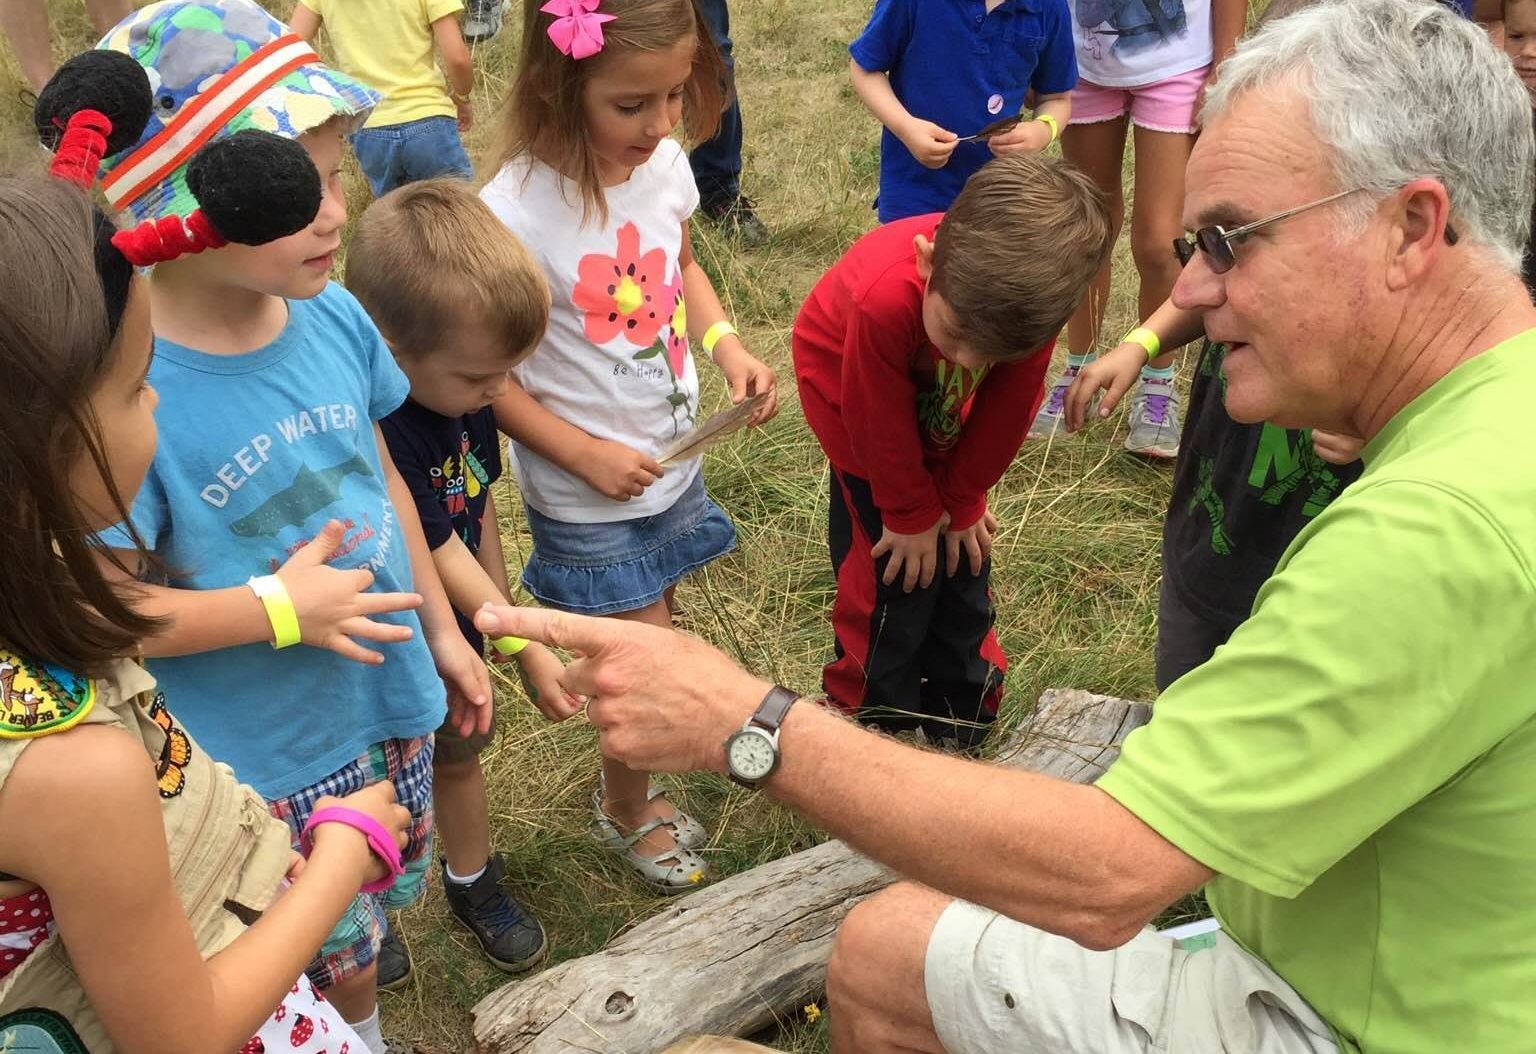 Local educator discovers how to unleash children’s love for nature ​